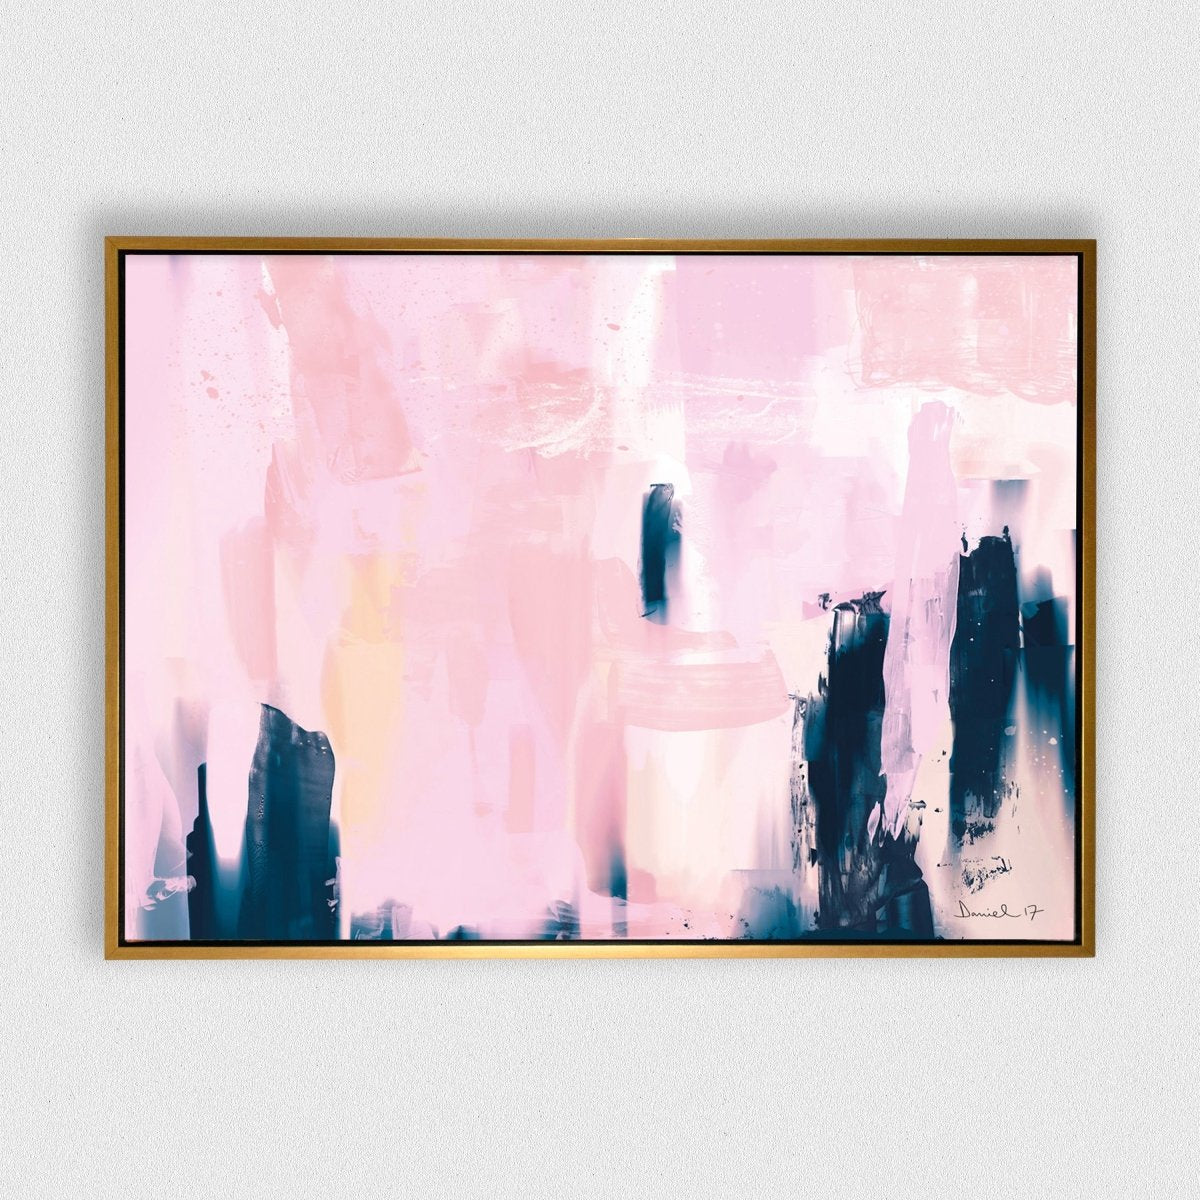 Taffy framed horizontal canvas wall art piece for sale at Vybe Interior